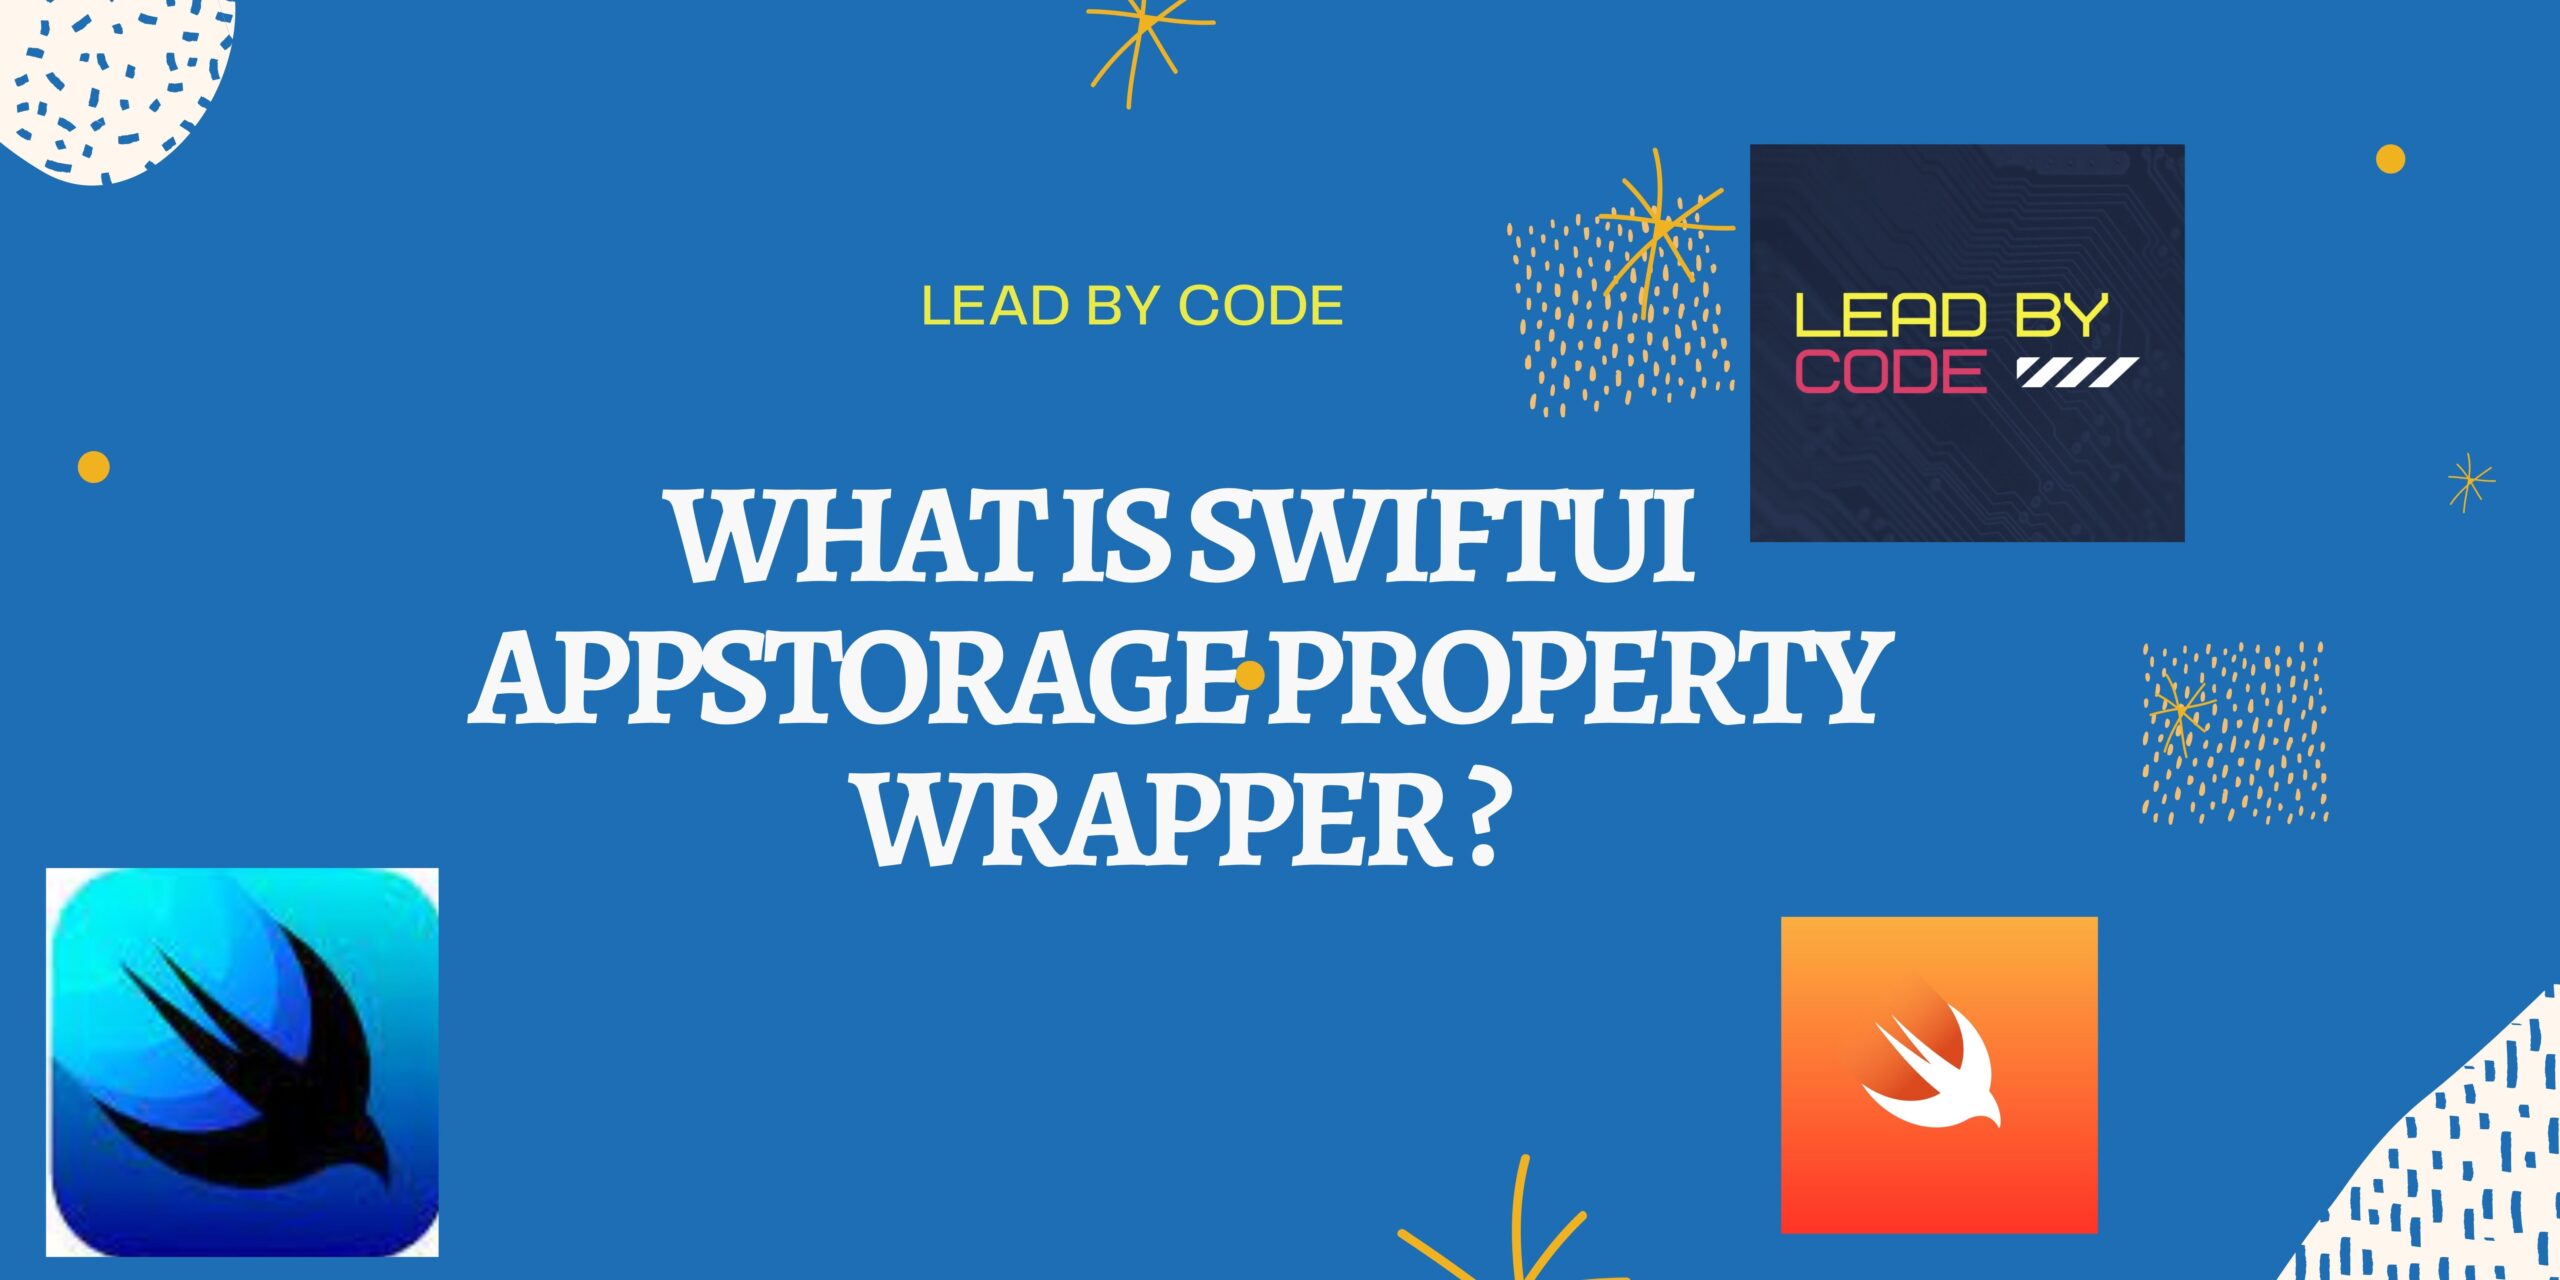 What is swiftui AppStorage property wrapper ?